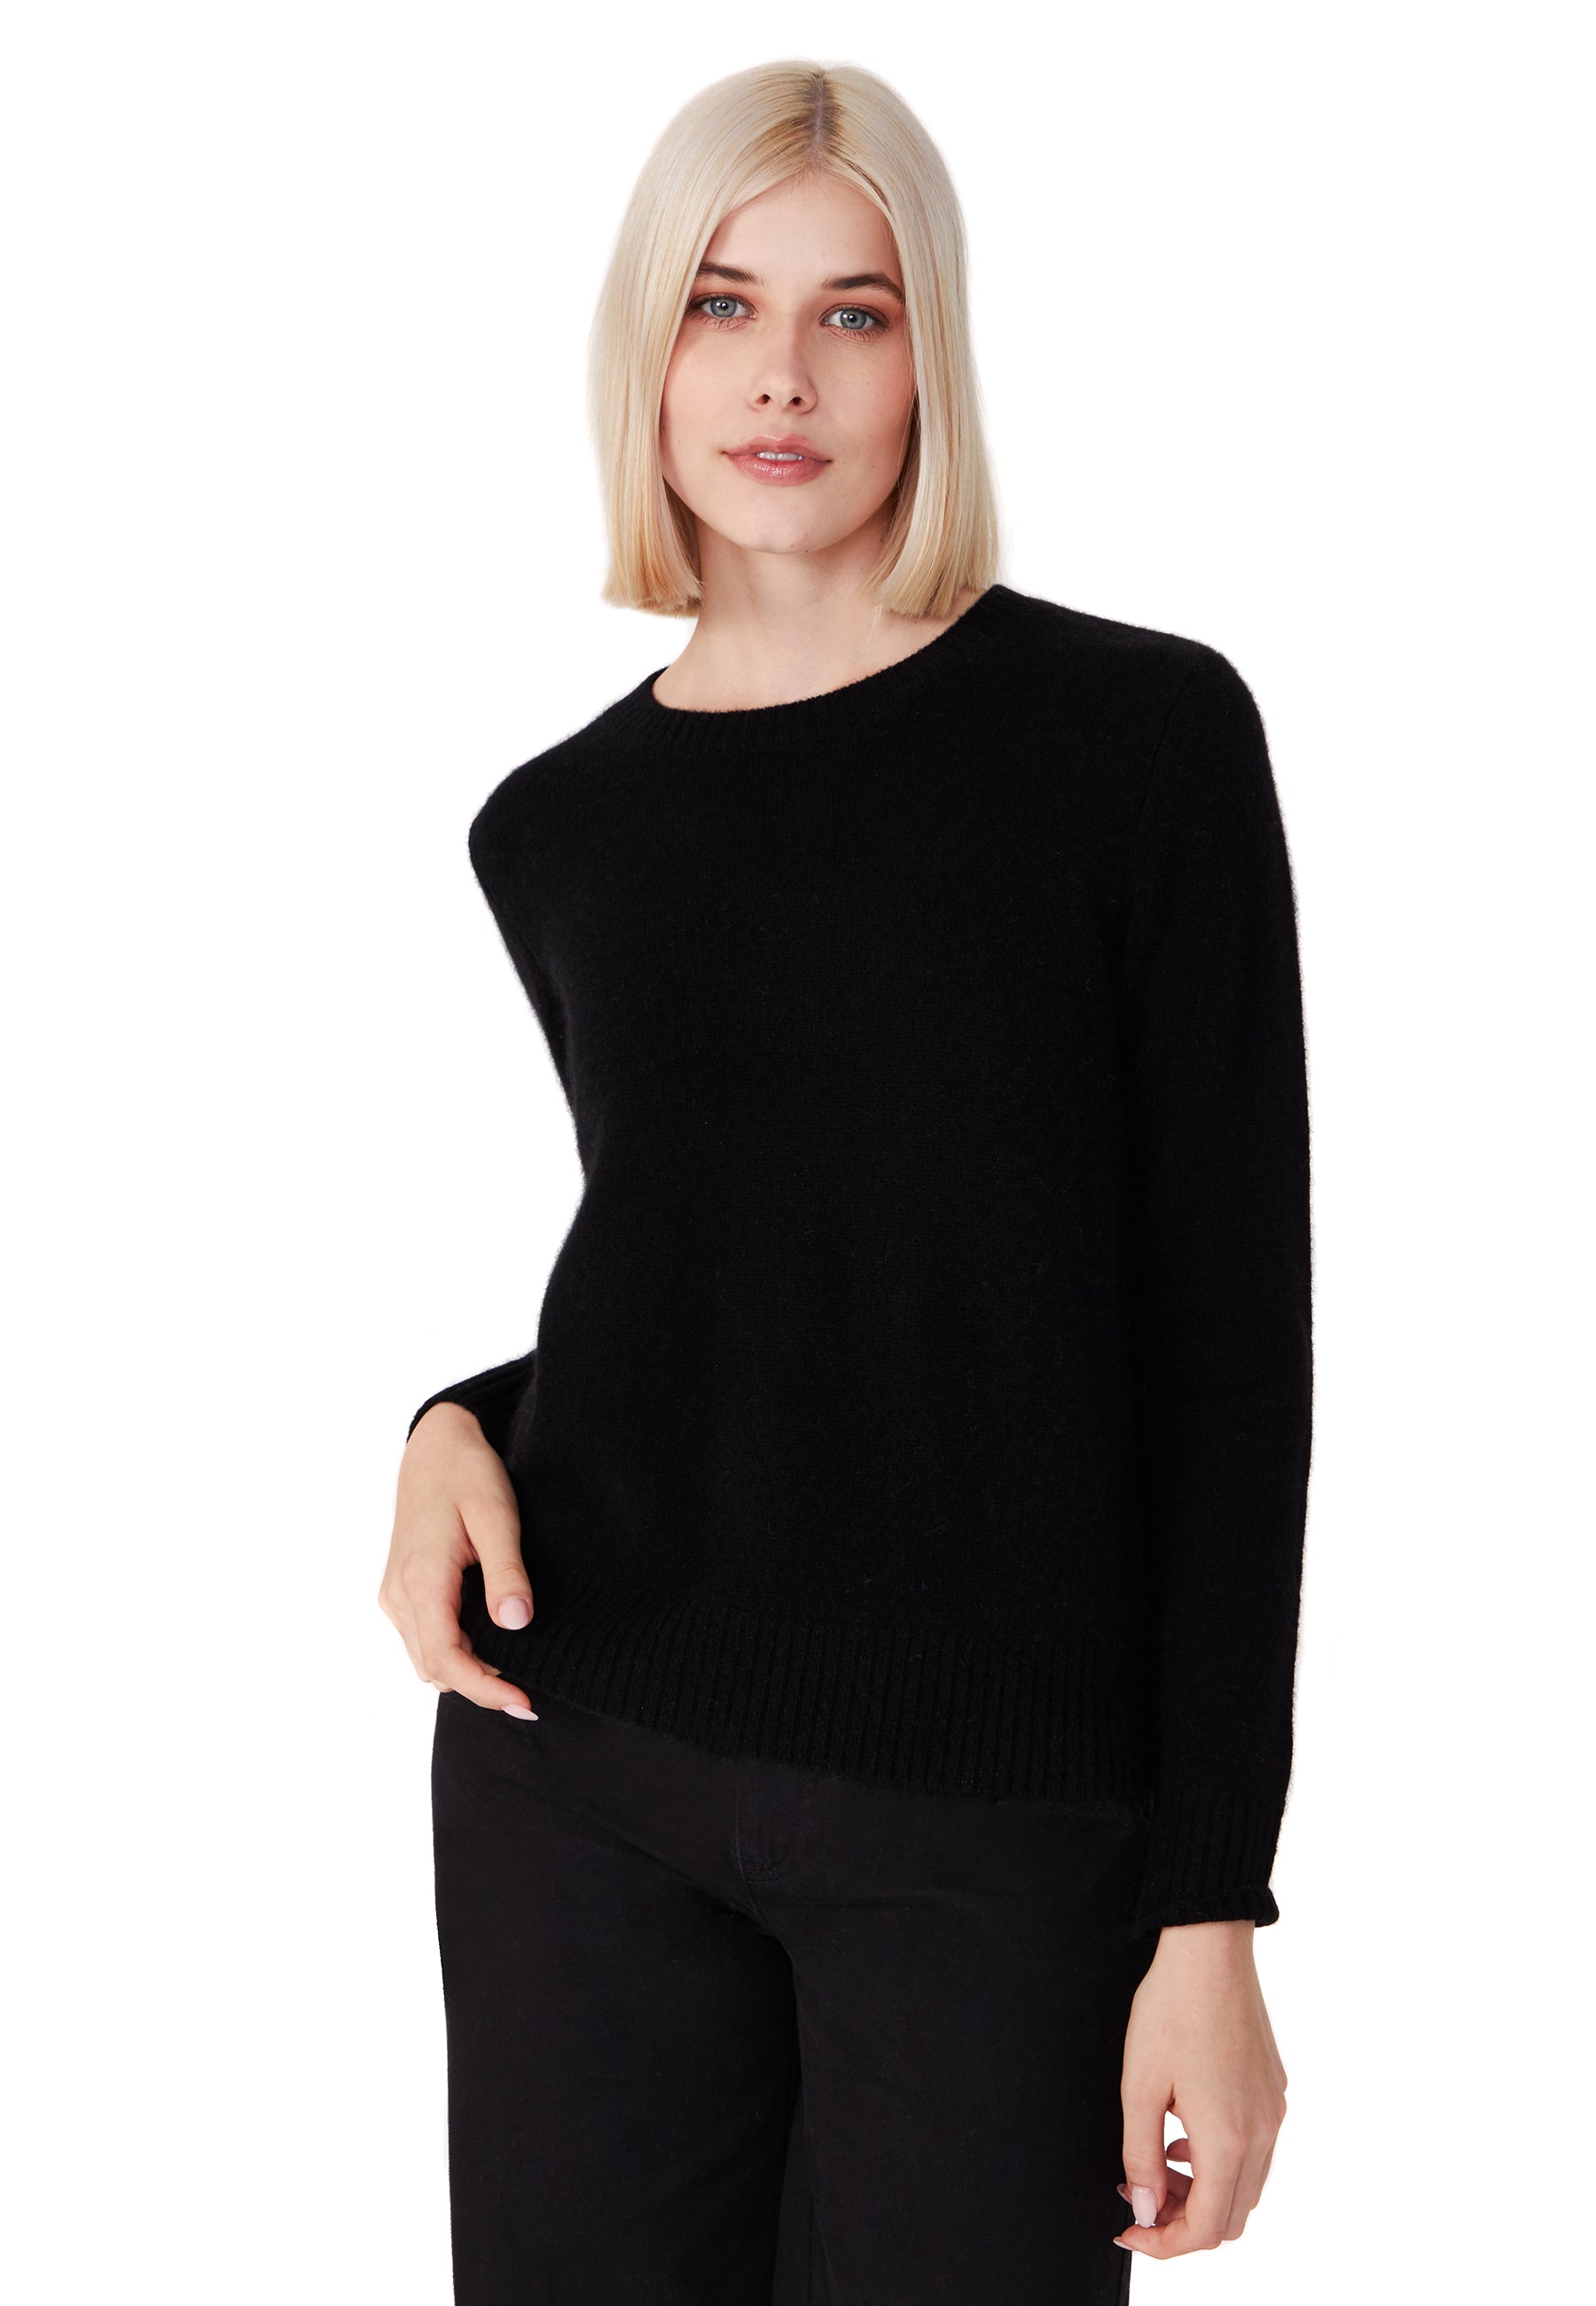 Women's Cashmere Sweaters - Our collection